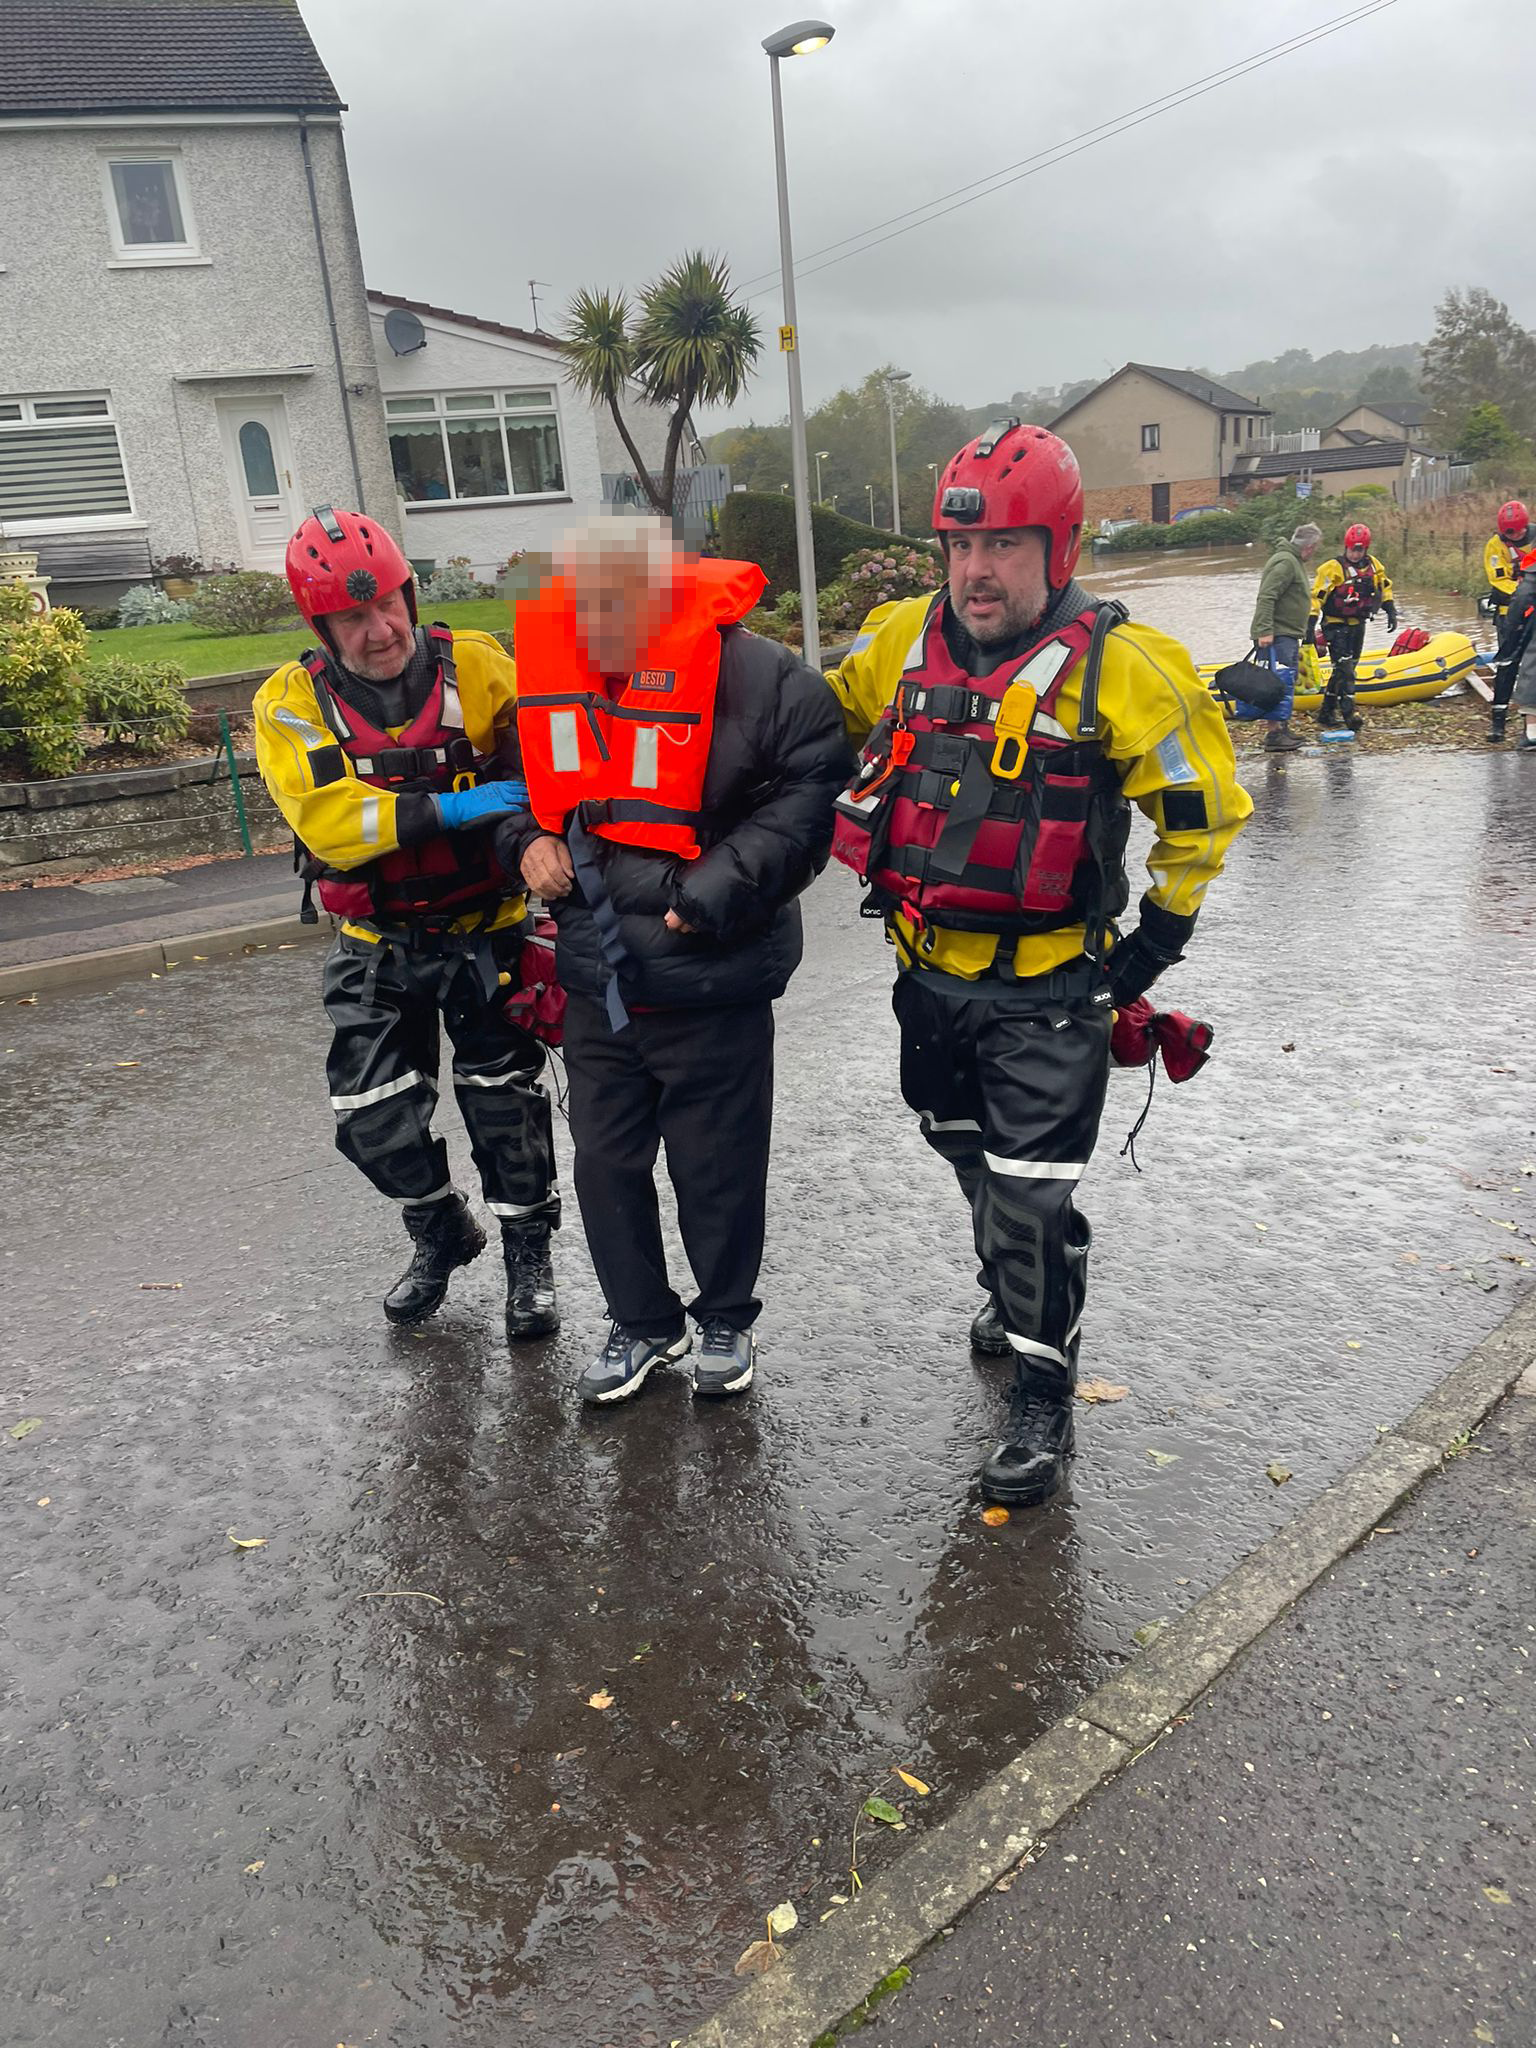 Two Coastguard officers help a person caught in Storm Babet floods